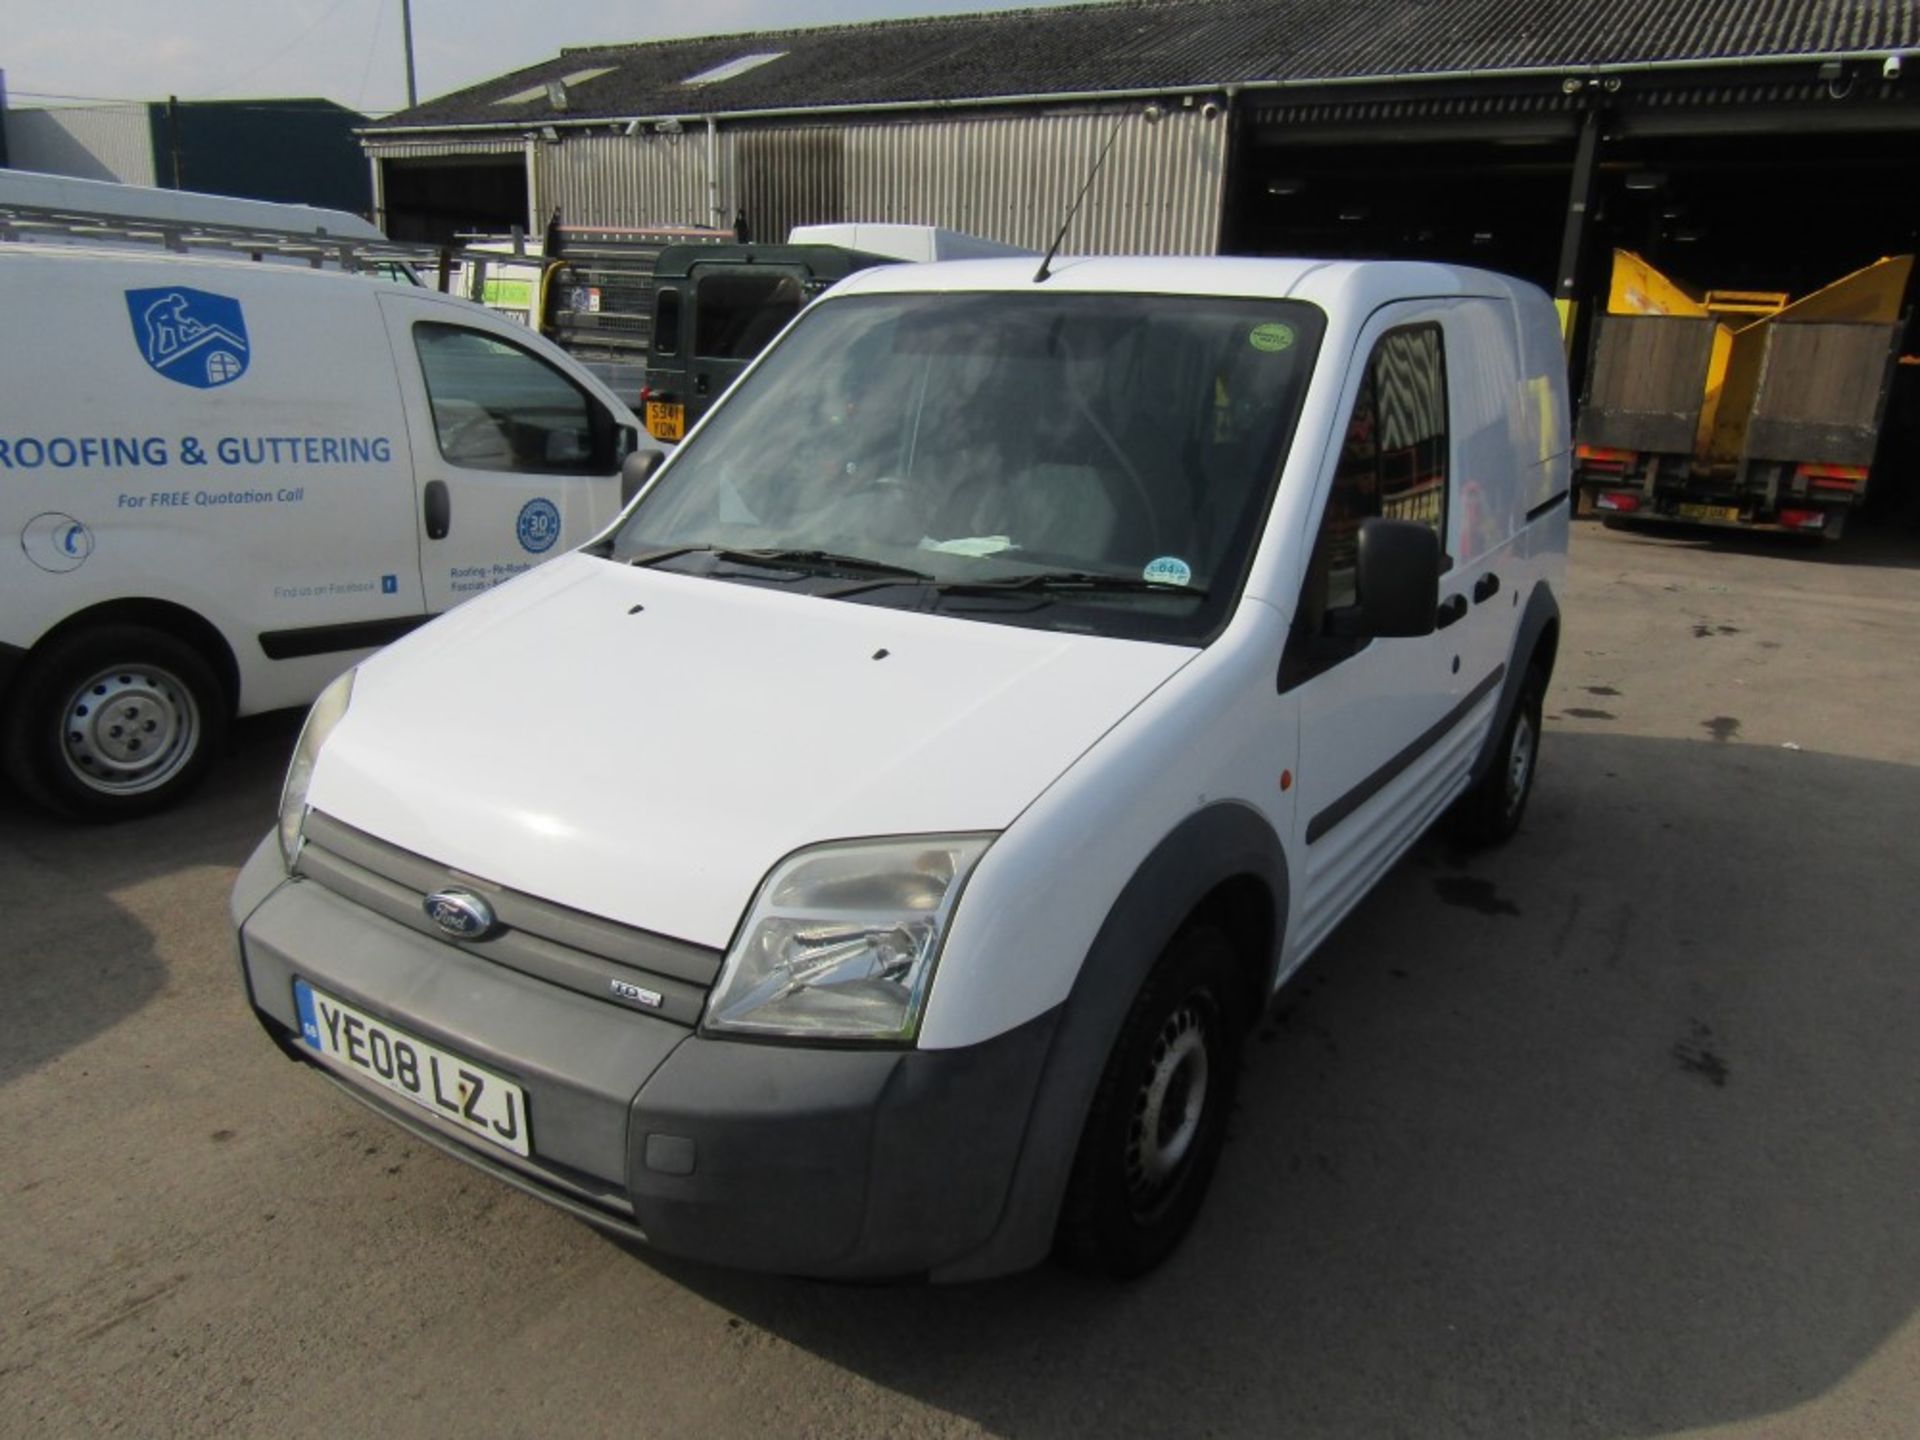 08 reg FORD TRANSIT CONNECT T210 L75 (DIRECT COUNCIL) 1ST REG 04/08, 68830M, V5 HERE, 1 OWNER FROM - Image 2 of 8